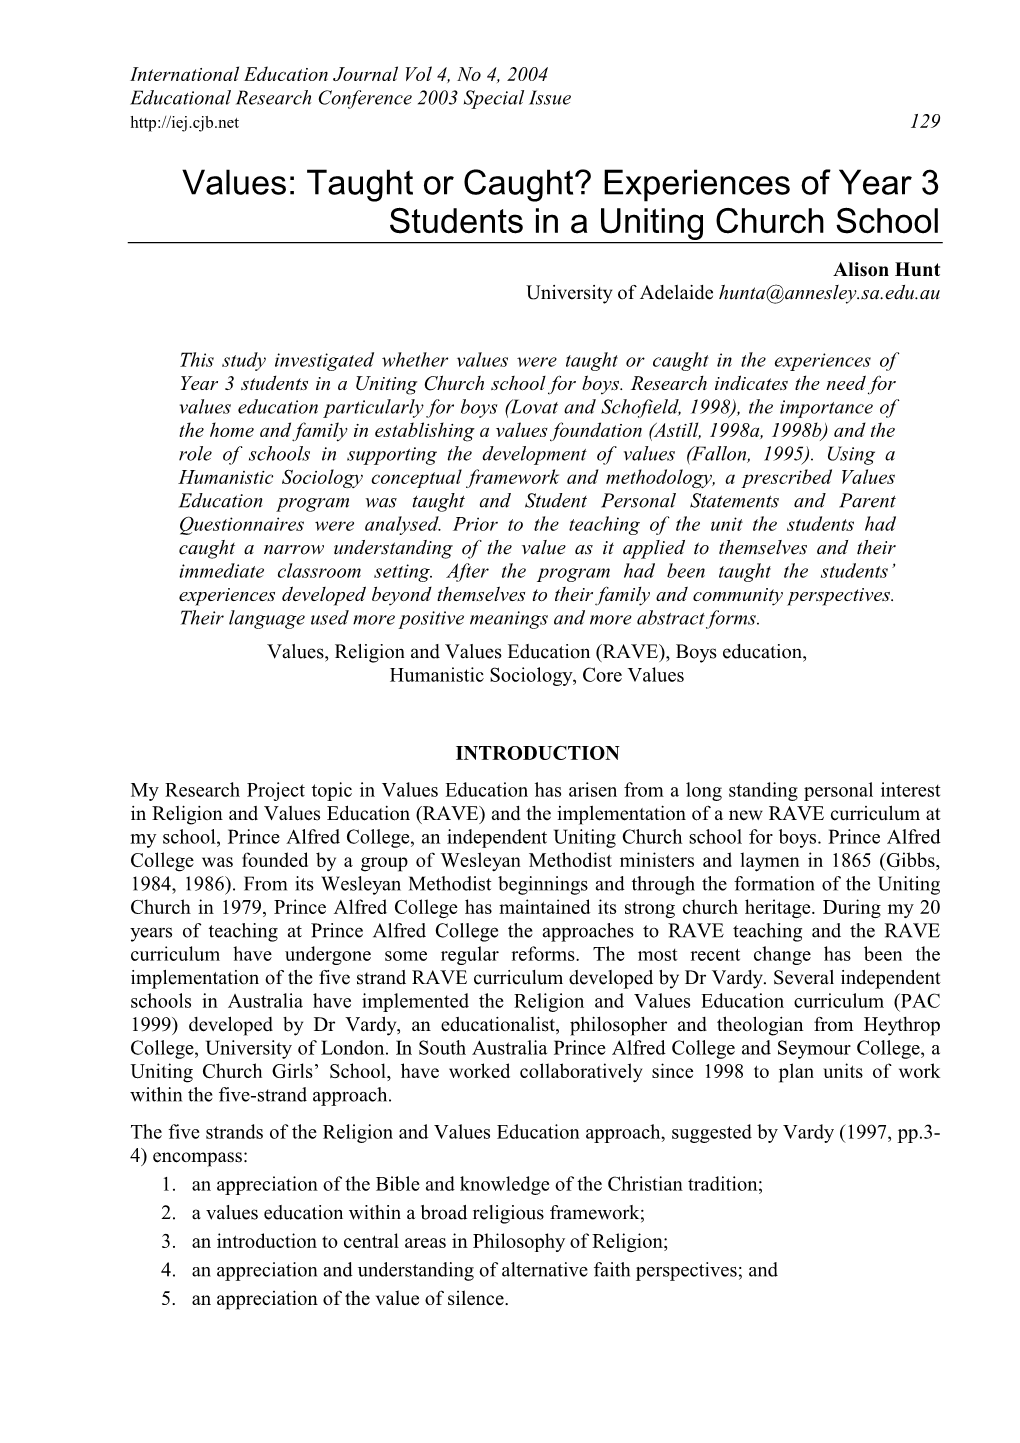 Values: Taught Or Caught? Experiences of Year 3 Students in a Uniting Church School Alison Hunt University of Adelaide Hunta@Annesley.Sa.Edu.Au